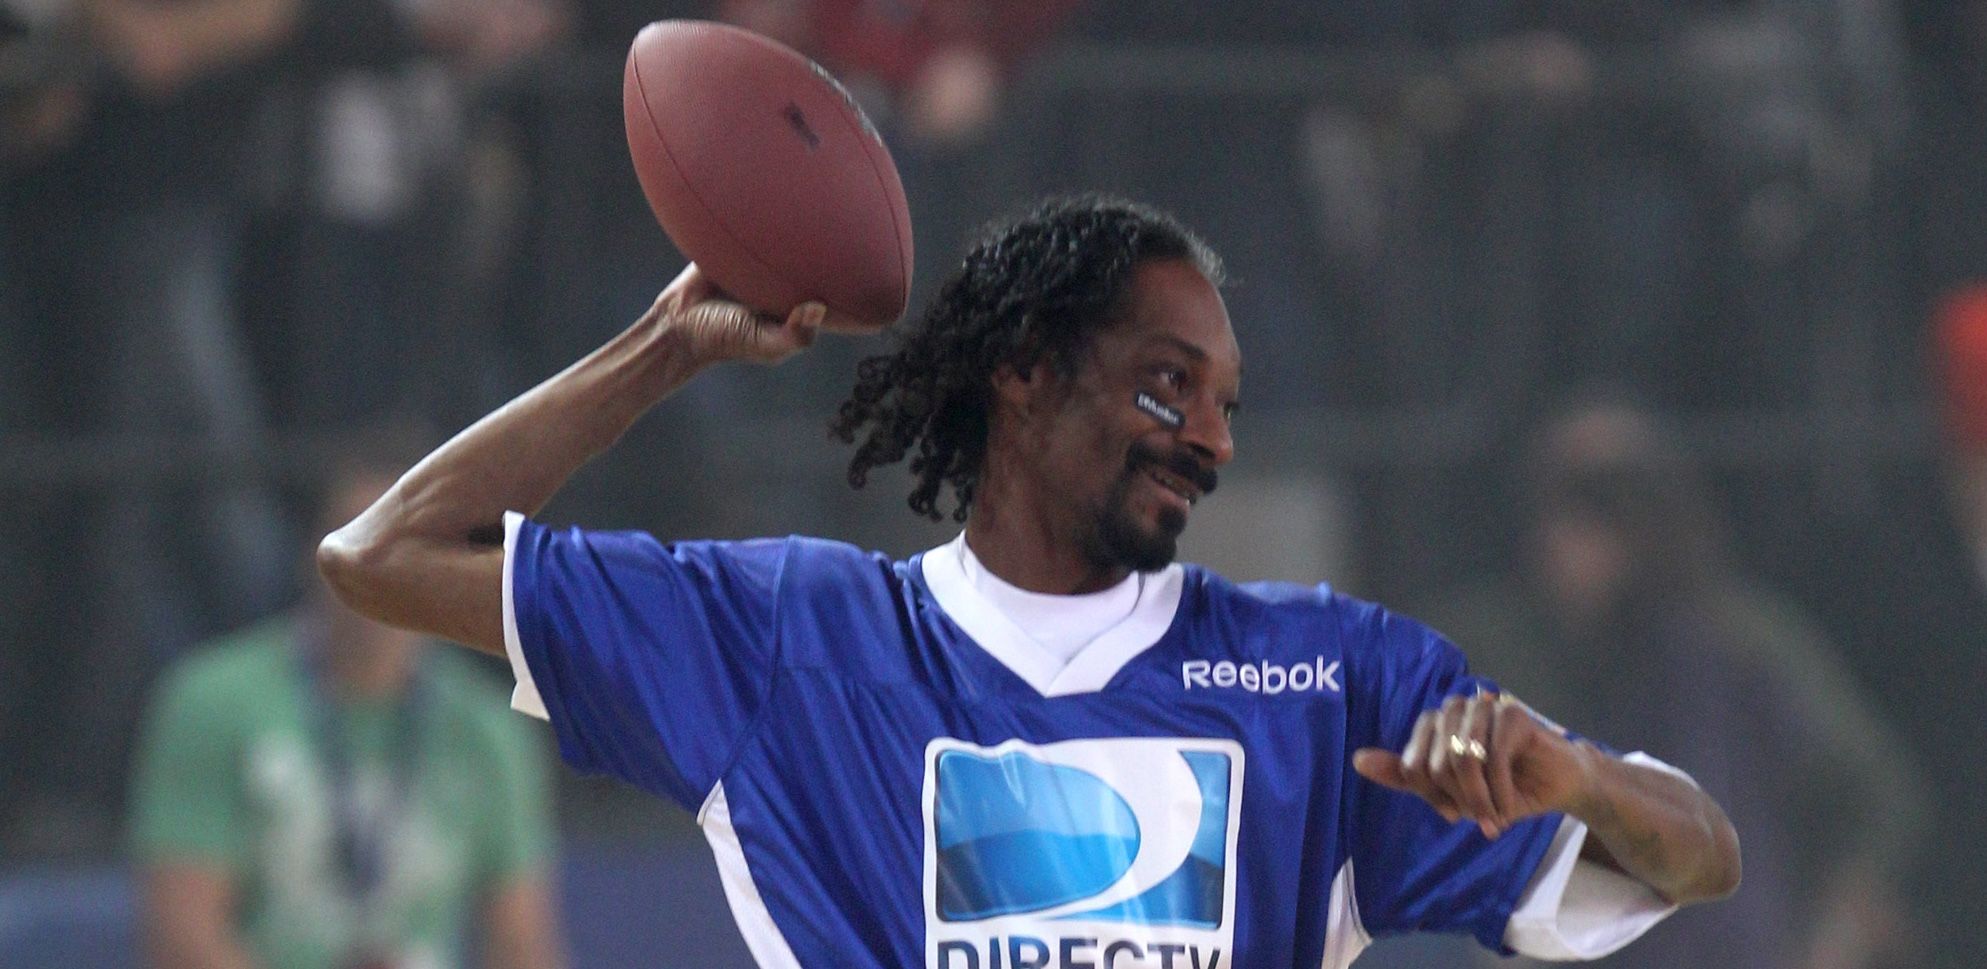 David Letterman Commended Snoop Dogg For Starting A Youth Football League